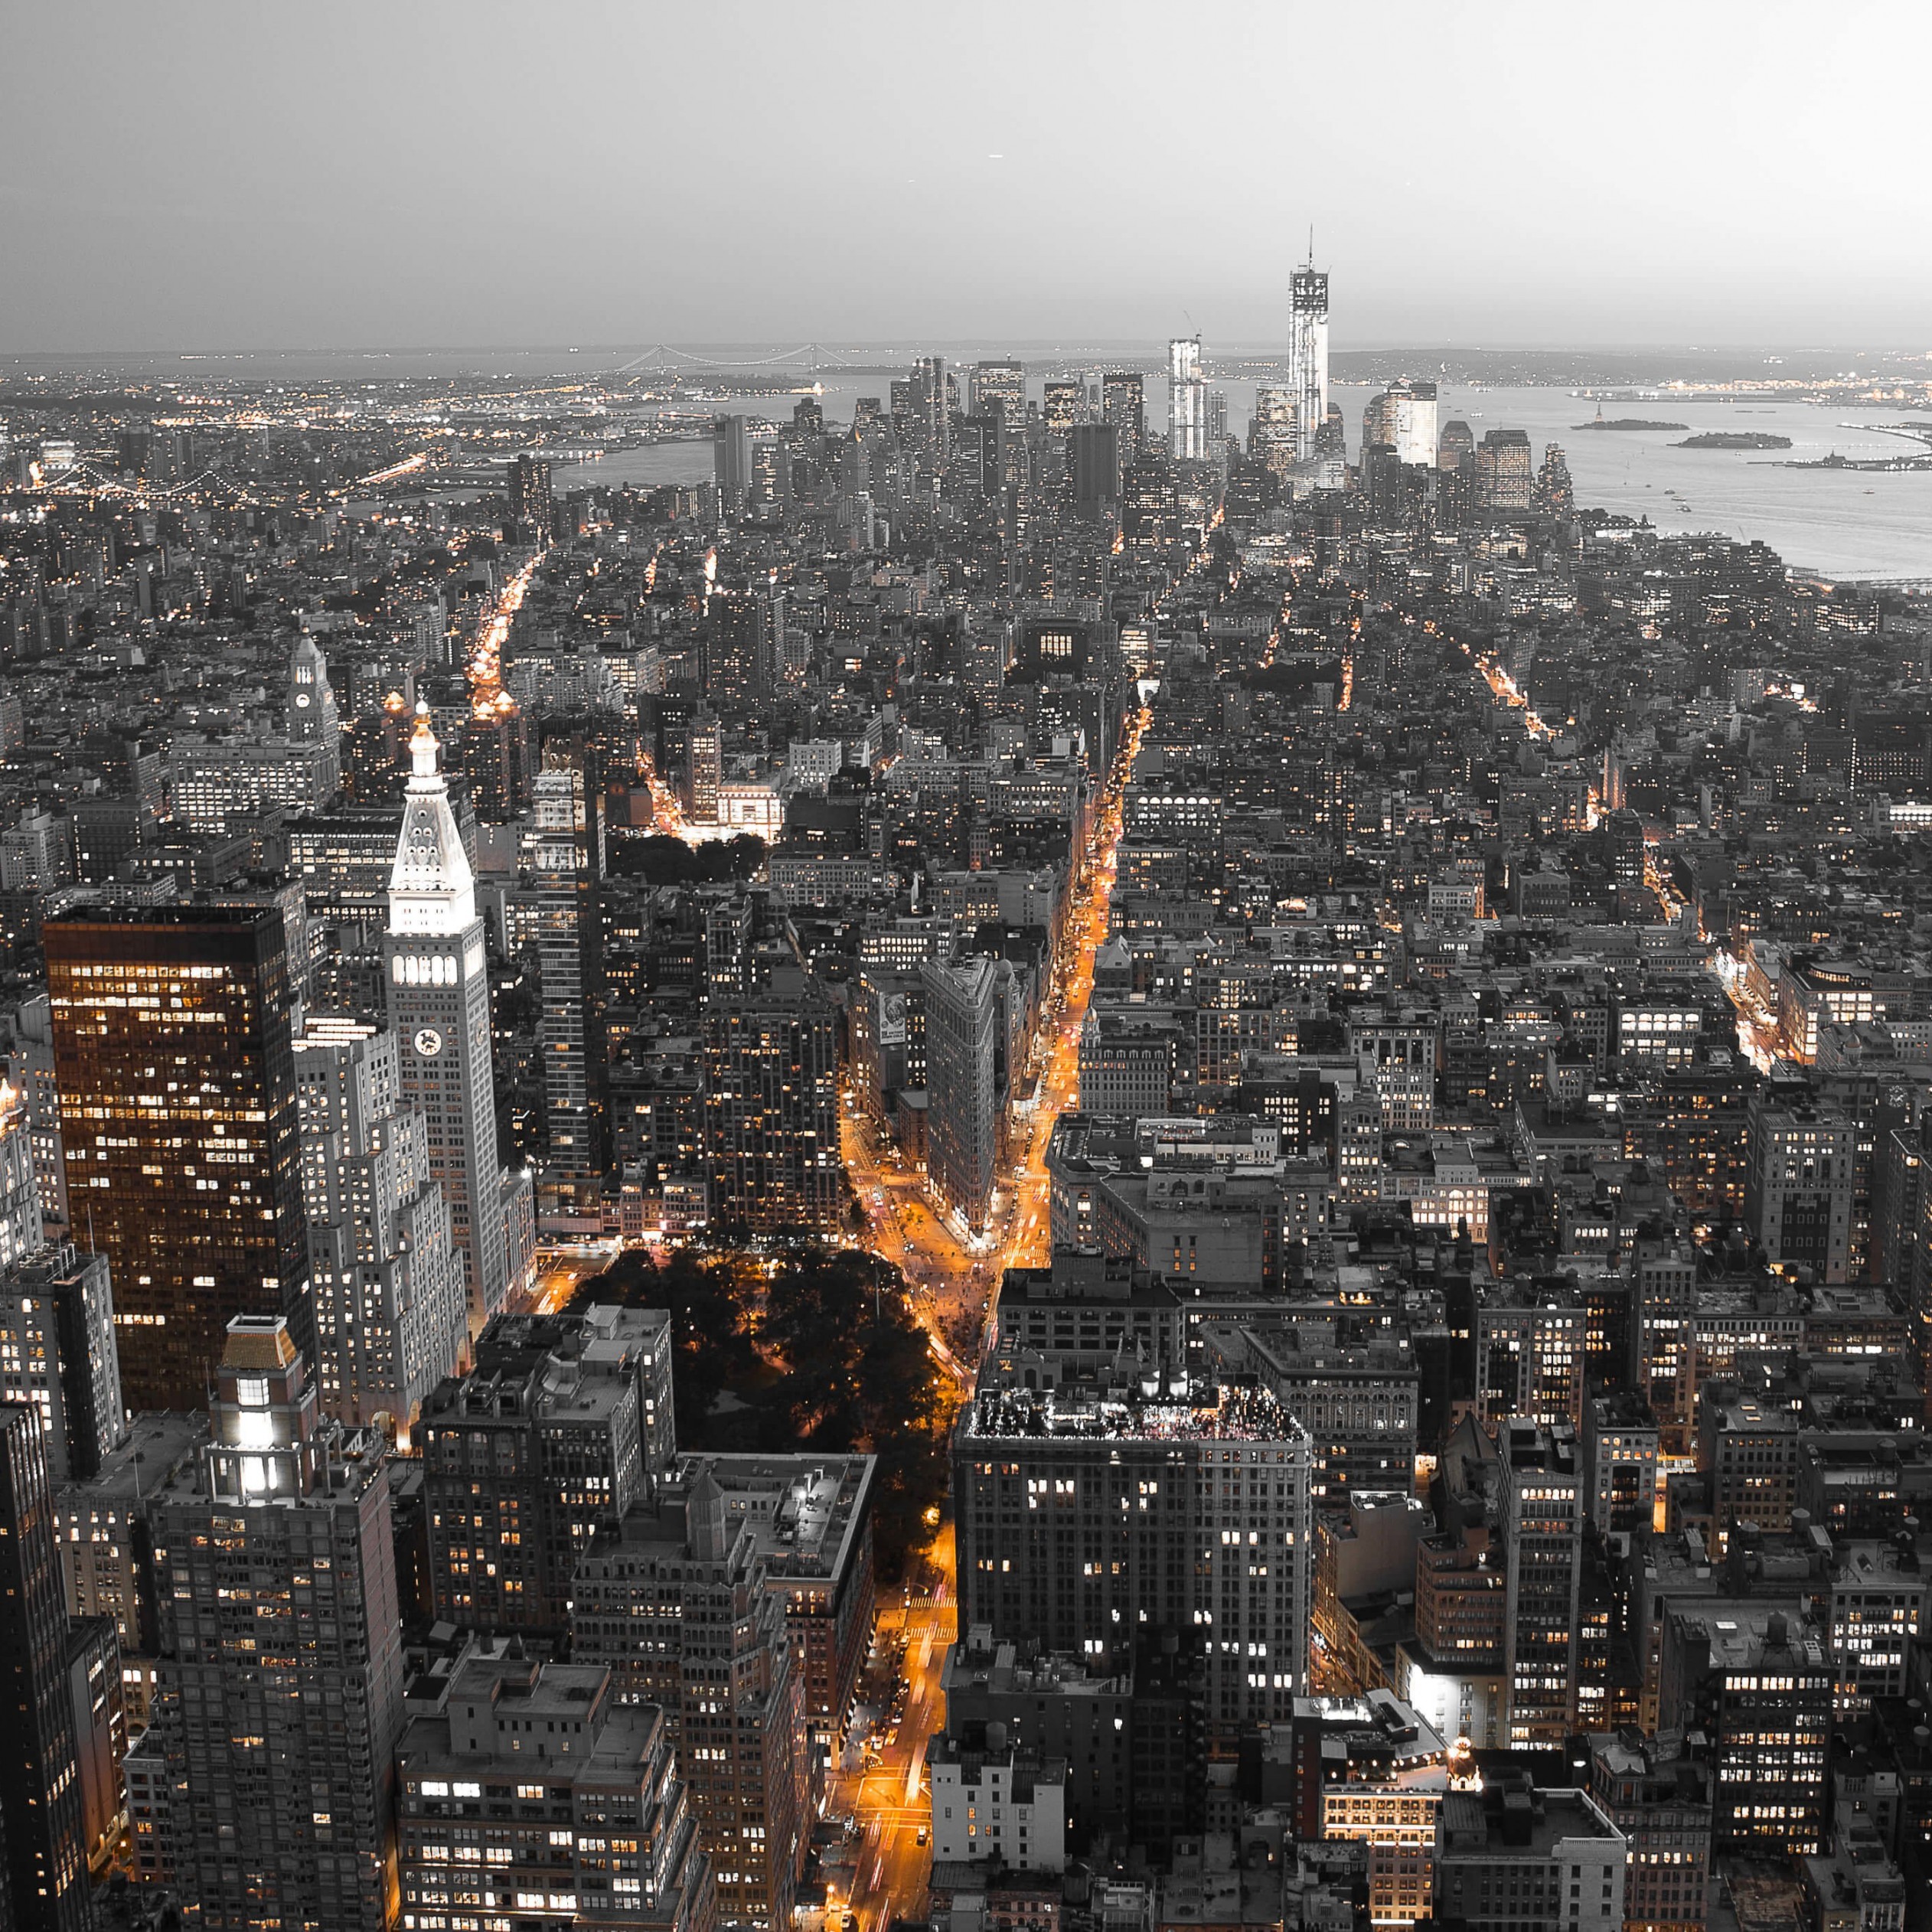 New York City by Night Wallpaper for Apple iPad Air